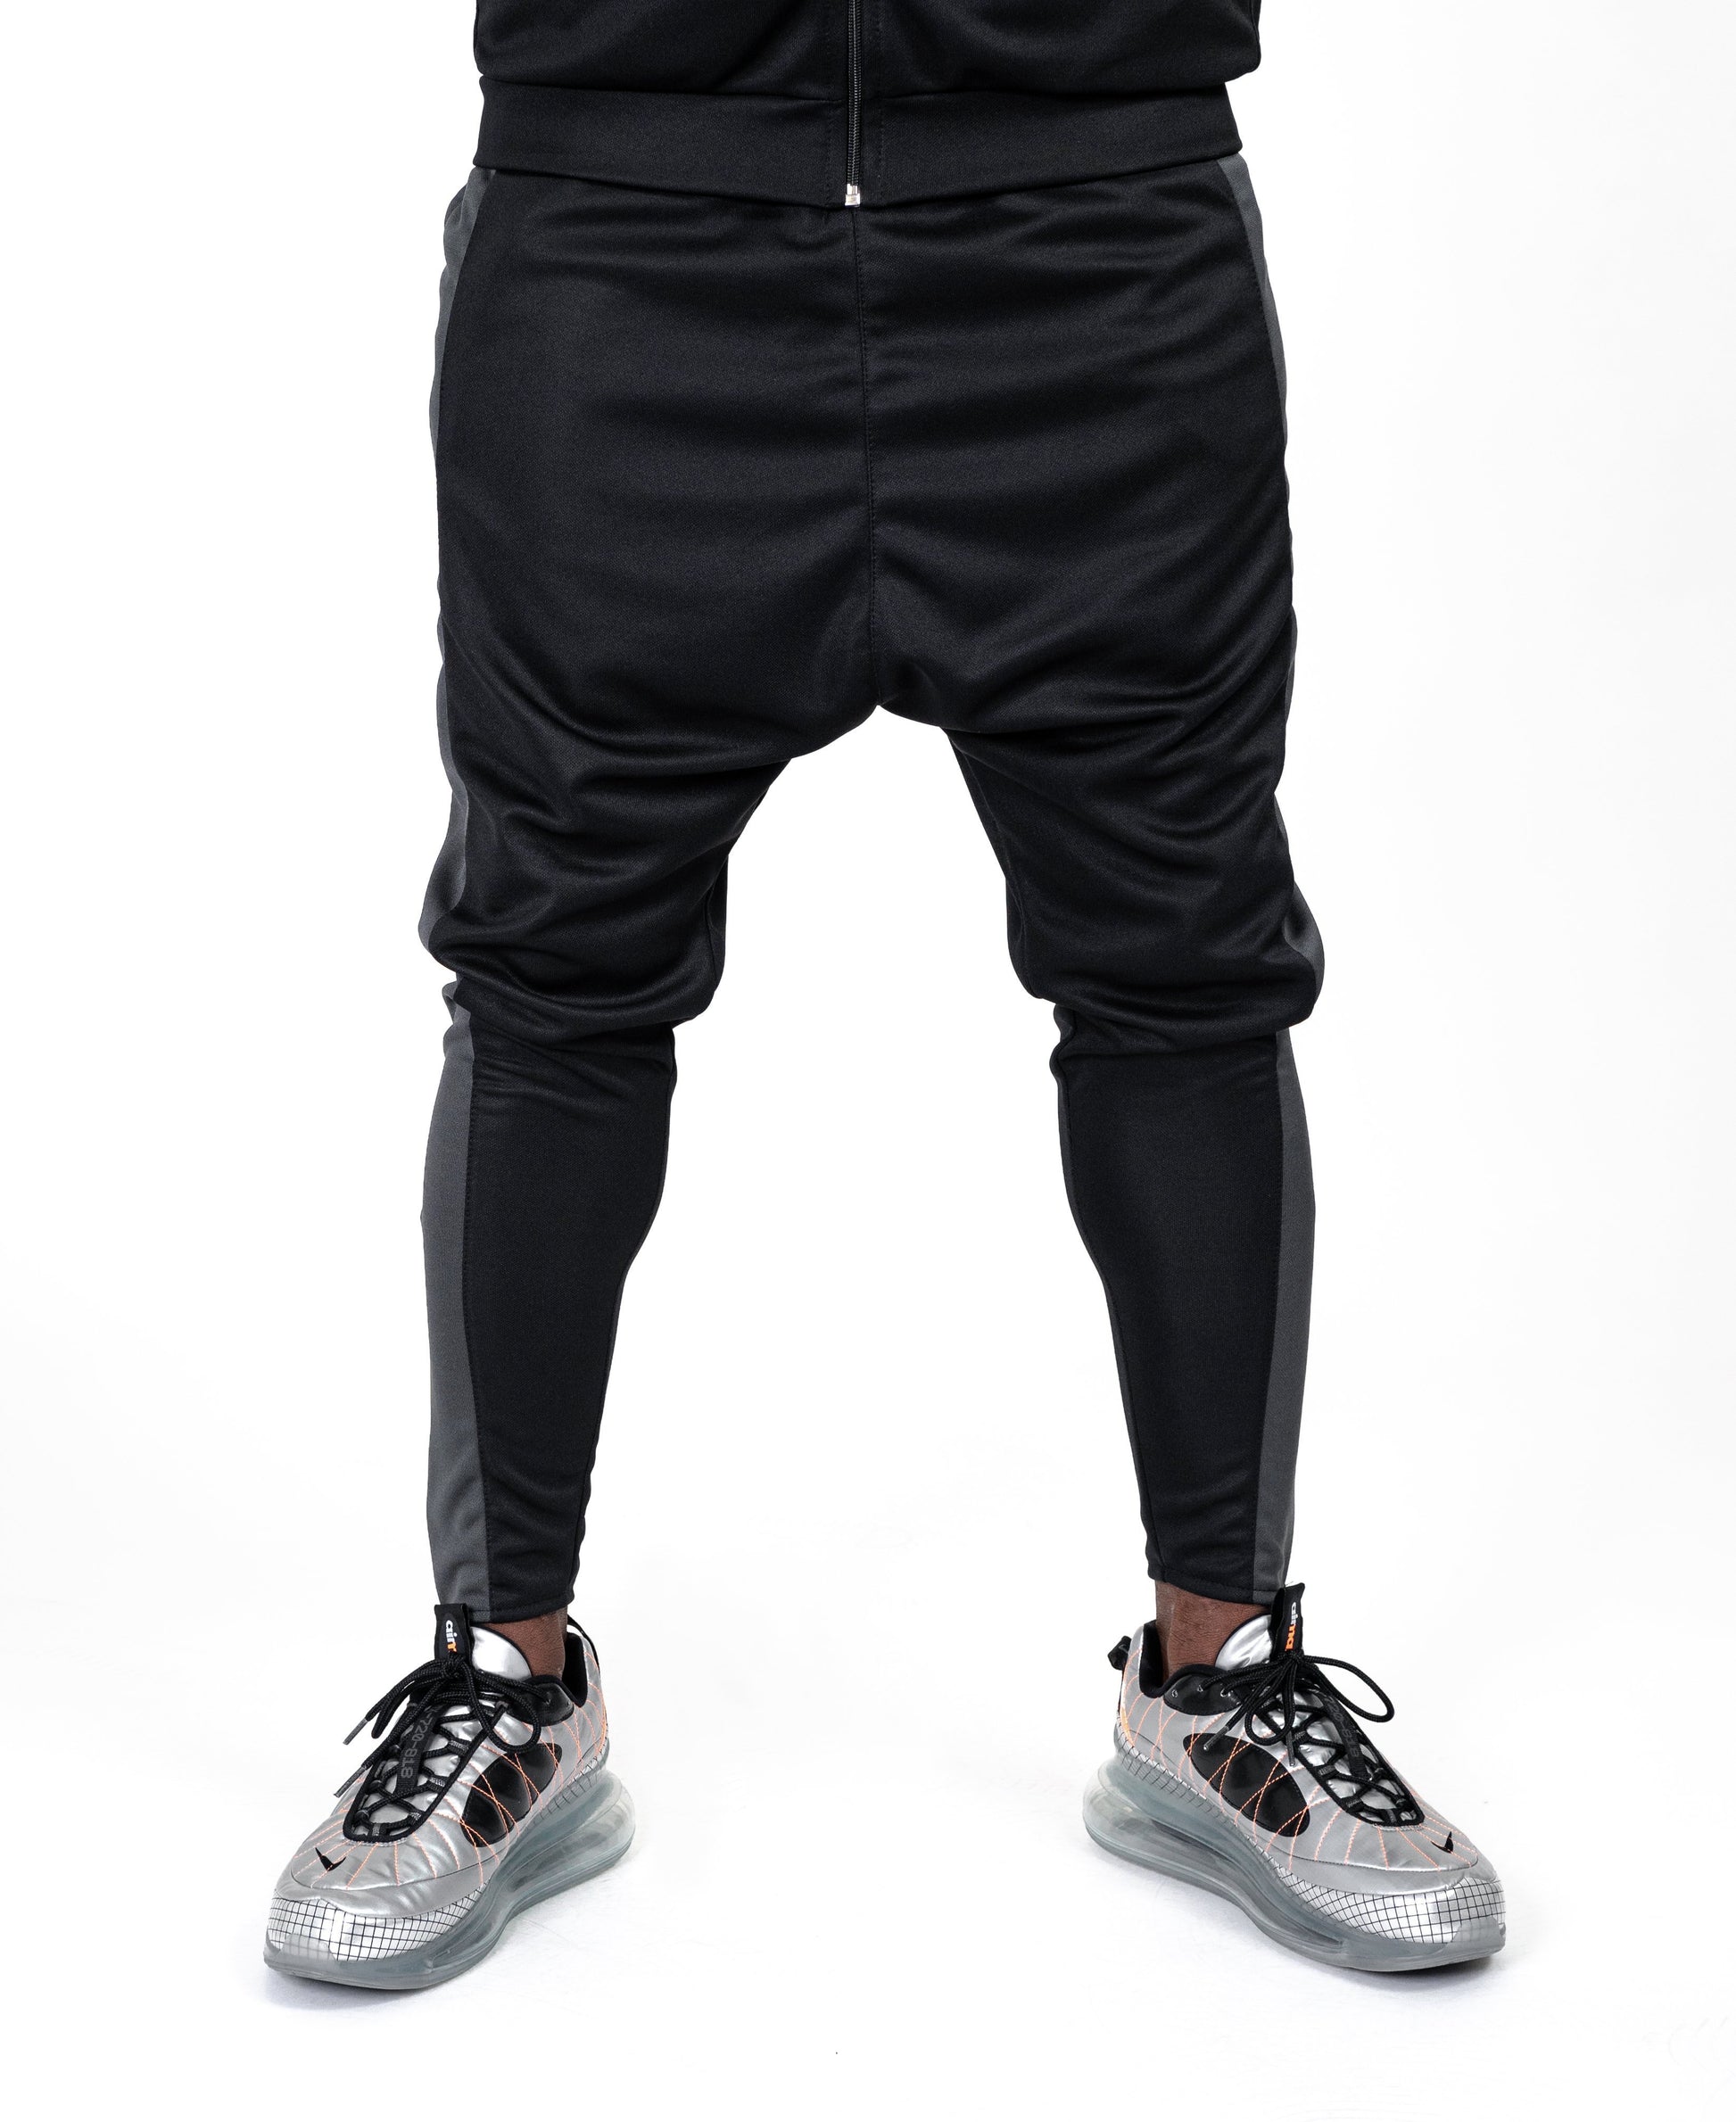 Black trousers with big grey line - Fatai Style